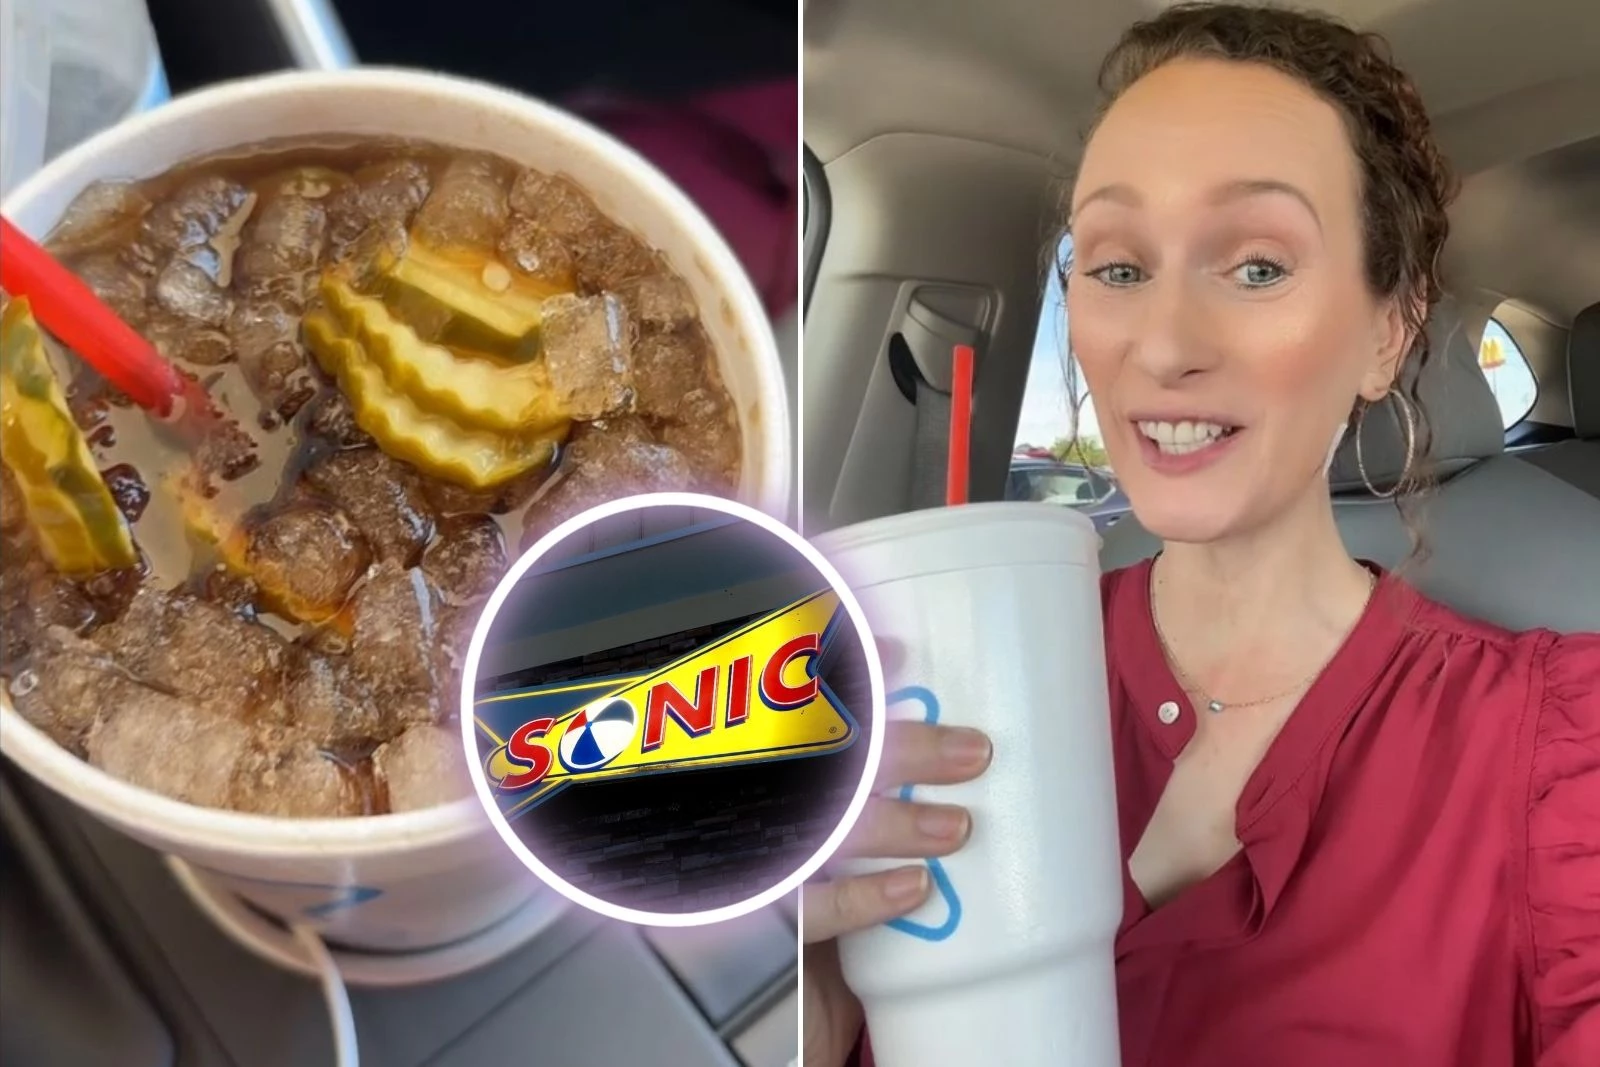 What Is Sonic’s Pickle Dr. Pepper? Odd Drink Order Goes Viral